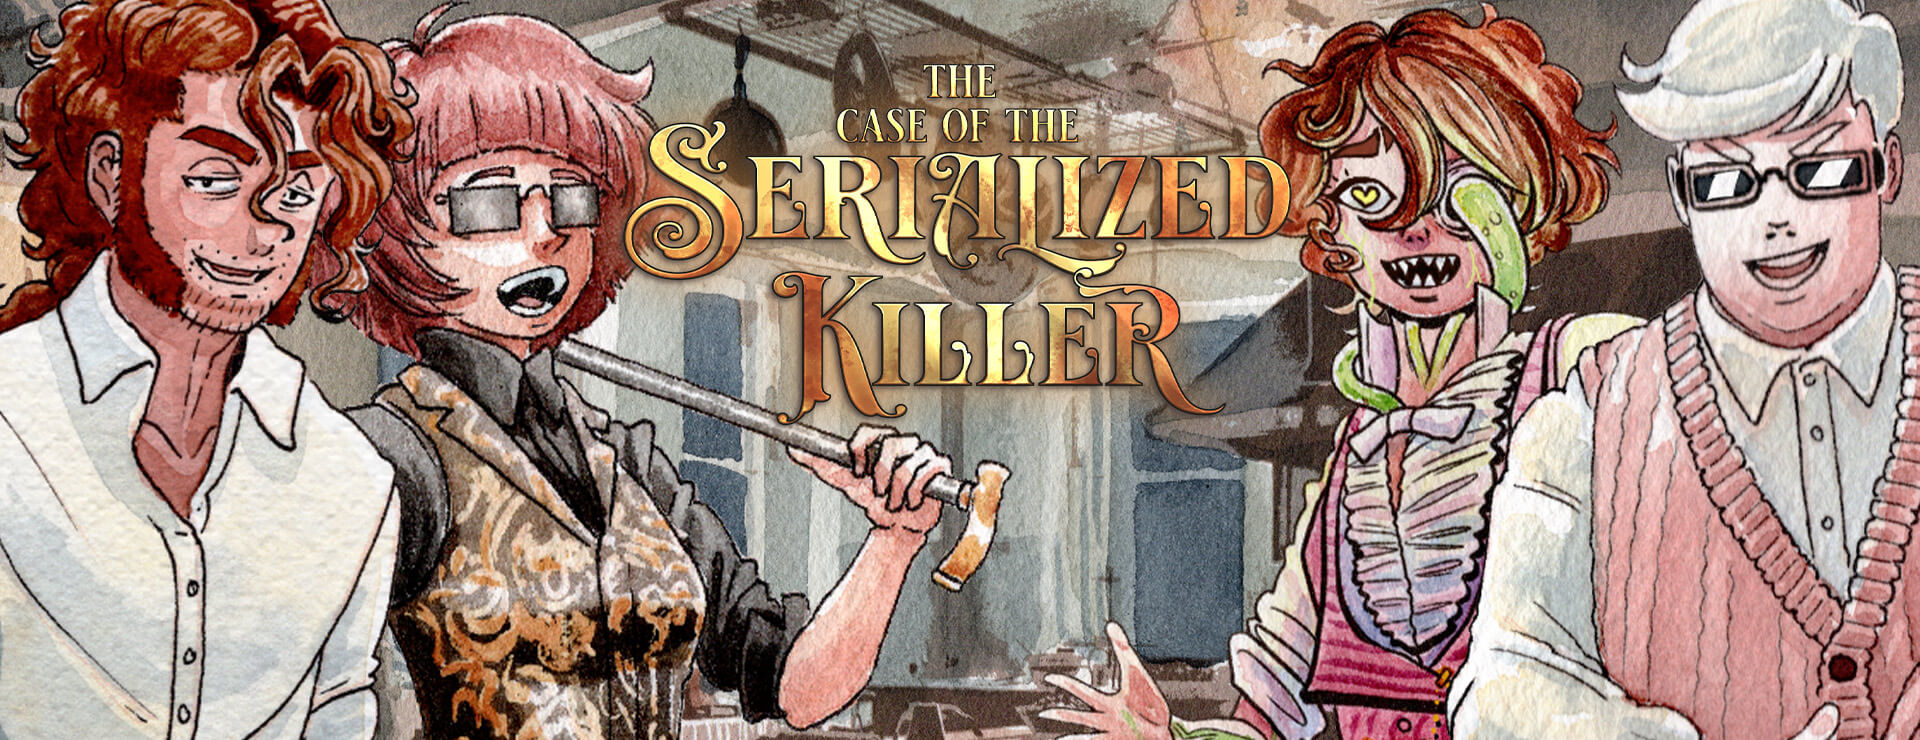 The Case of the Serialized Killer - Visual Novel Game